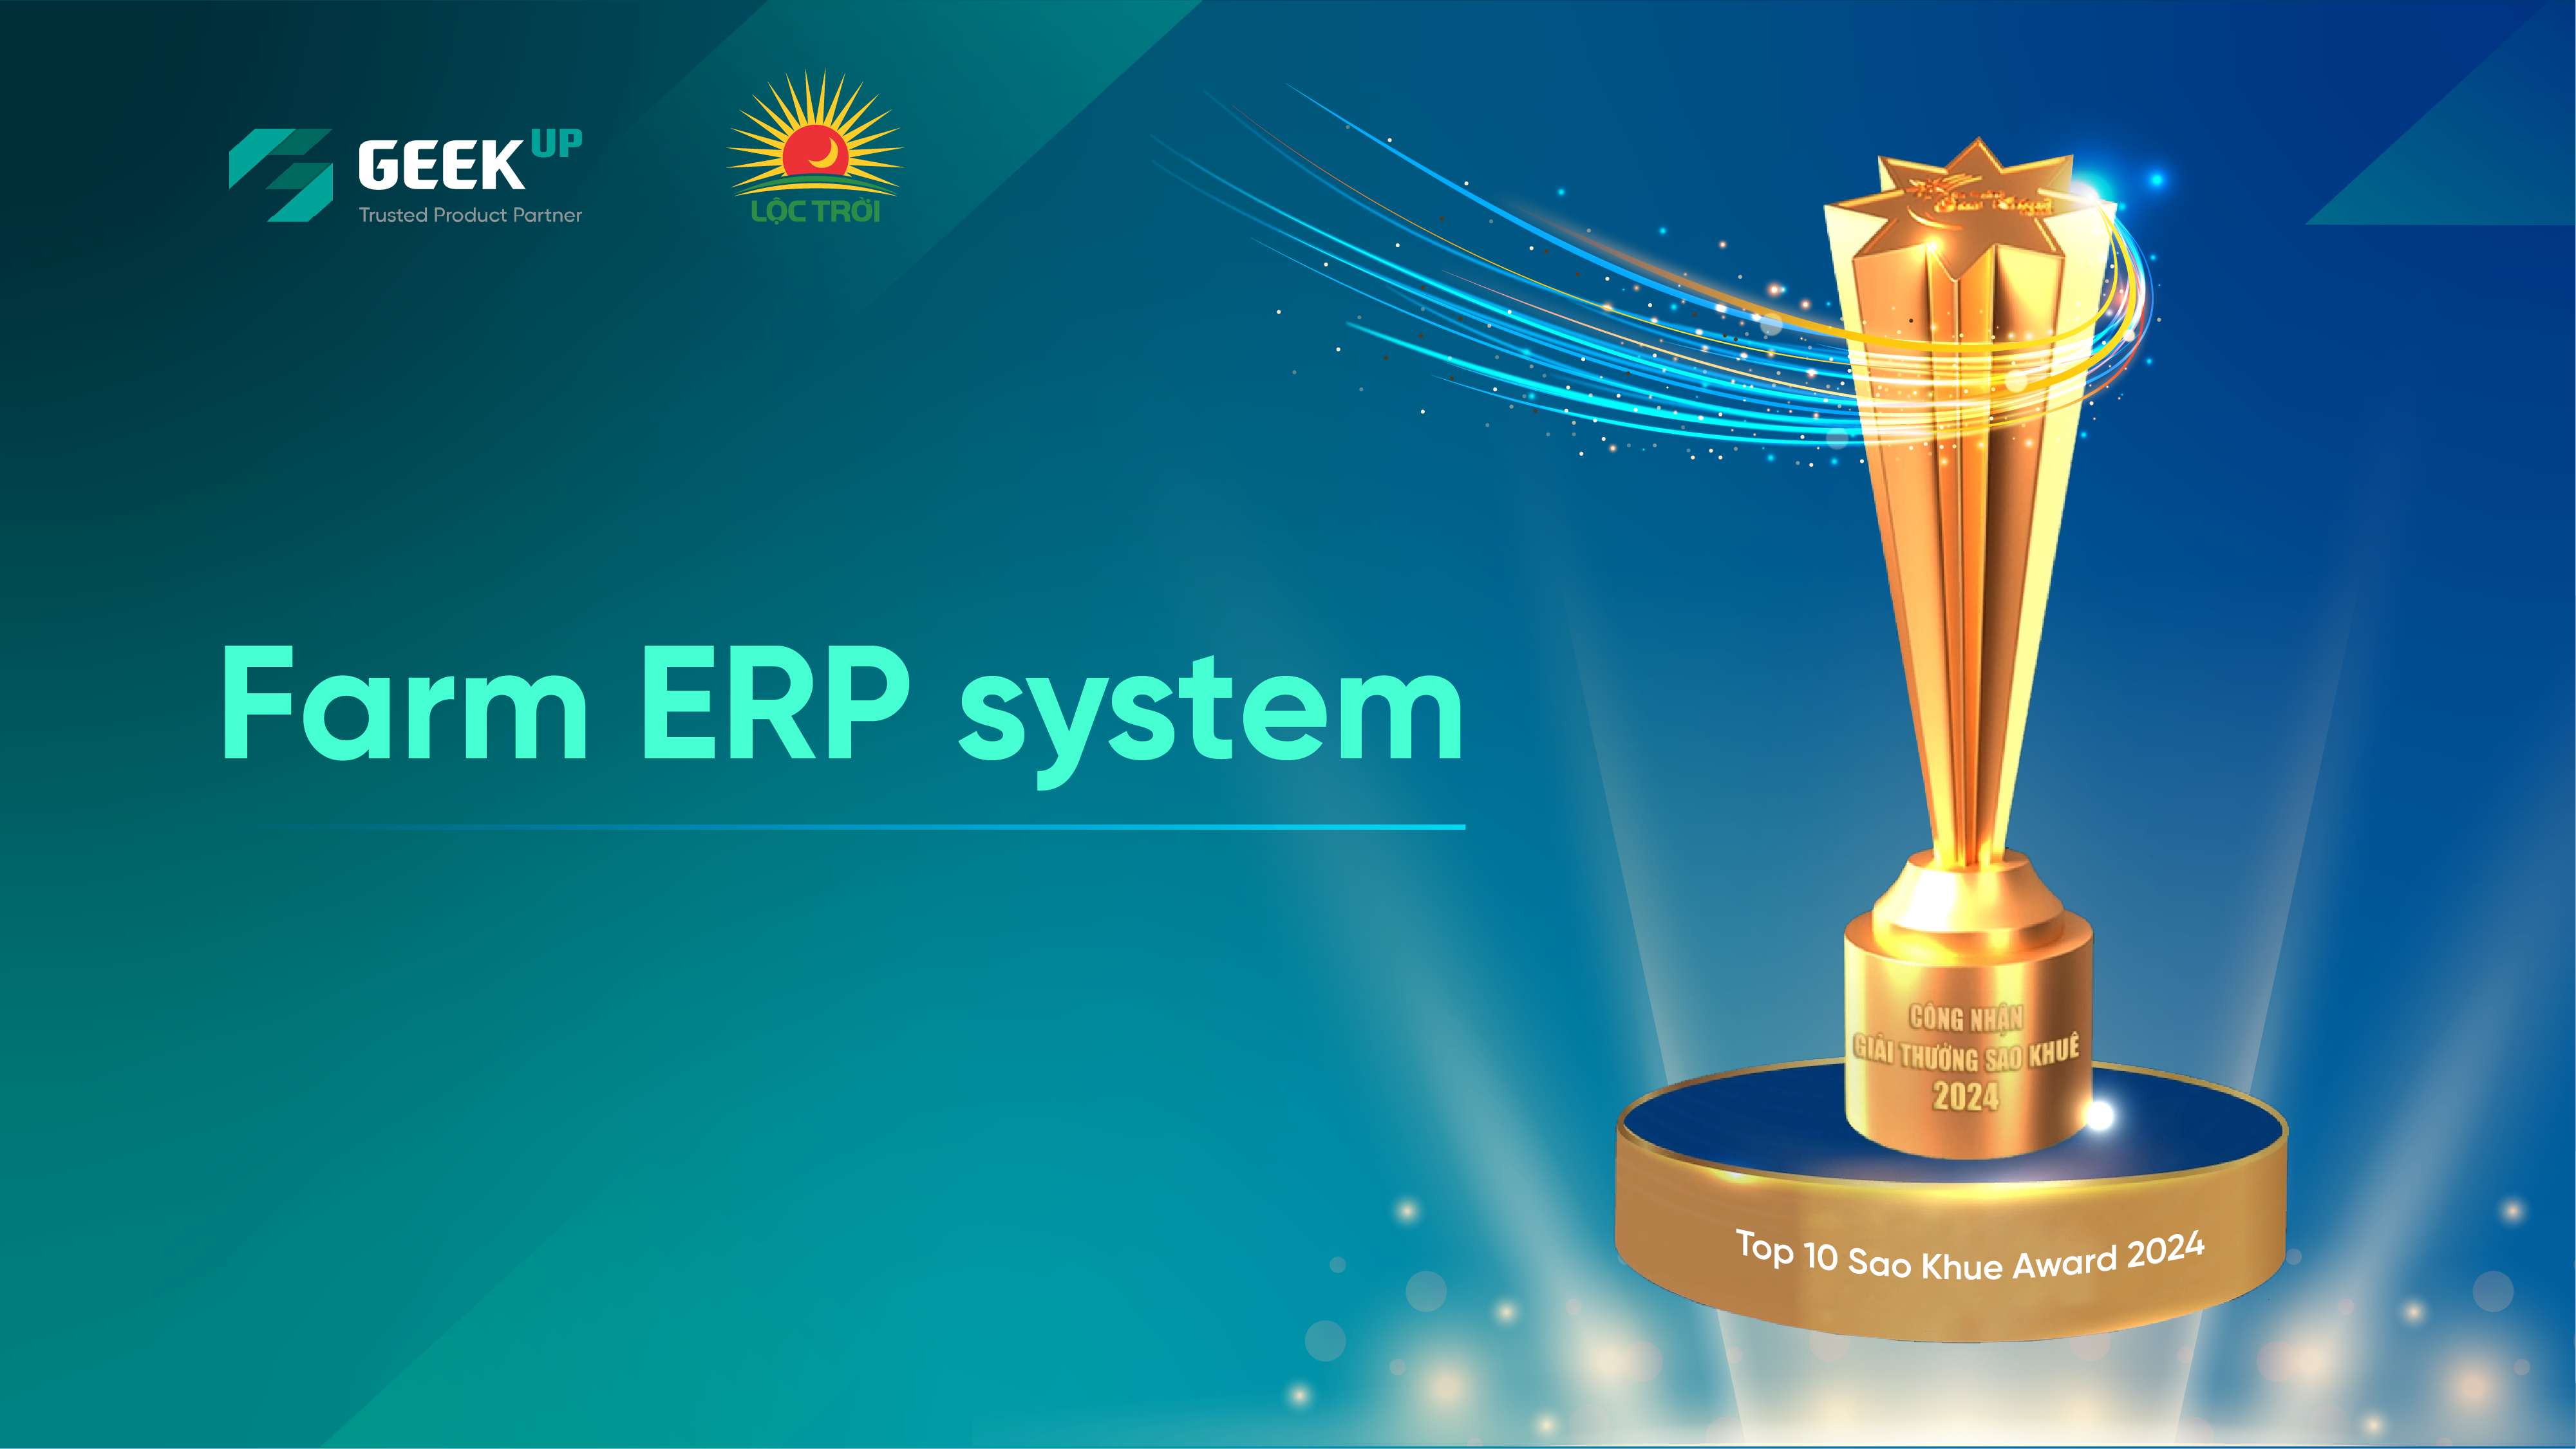 Loc Troi Group's Farm ERP system has been honored as one of the Top 10 winners of the Sao Khue Awards 2024